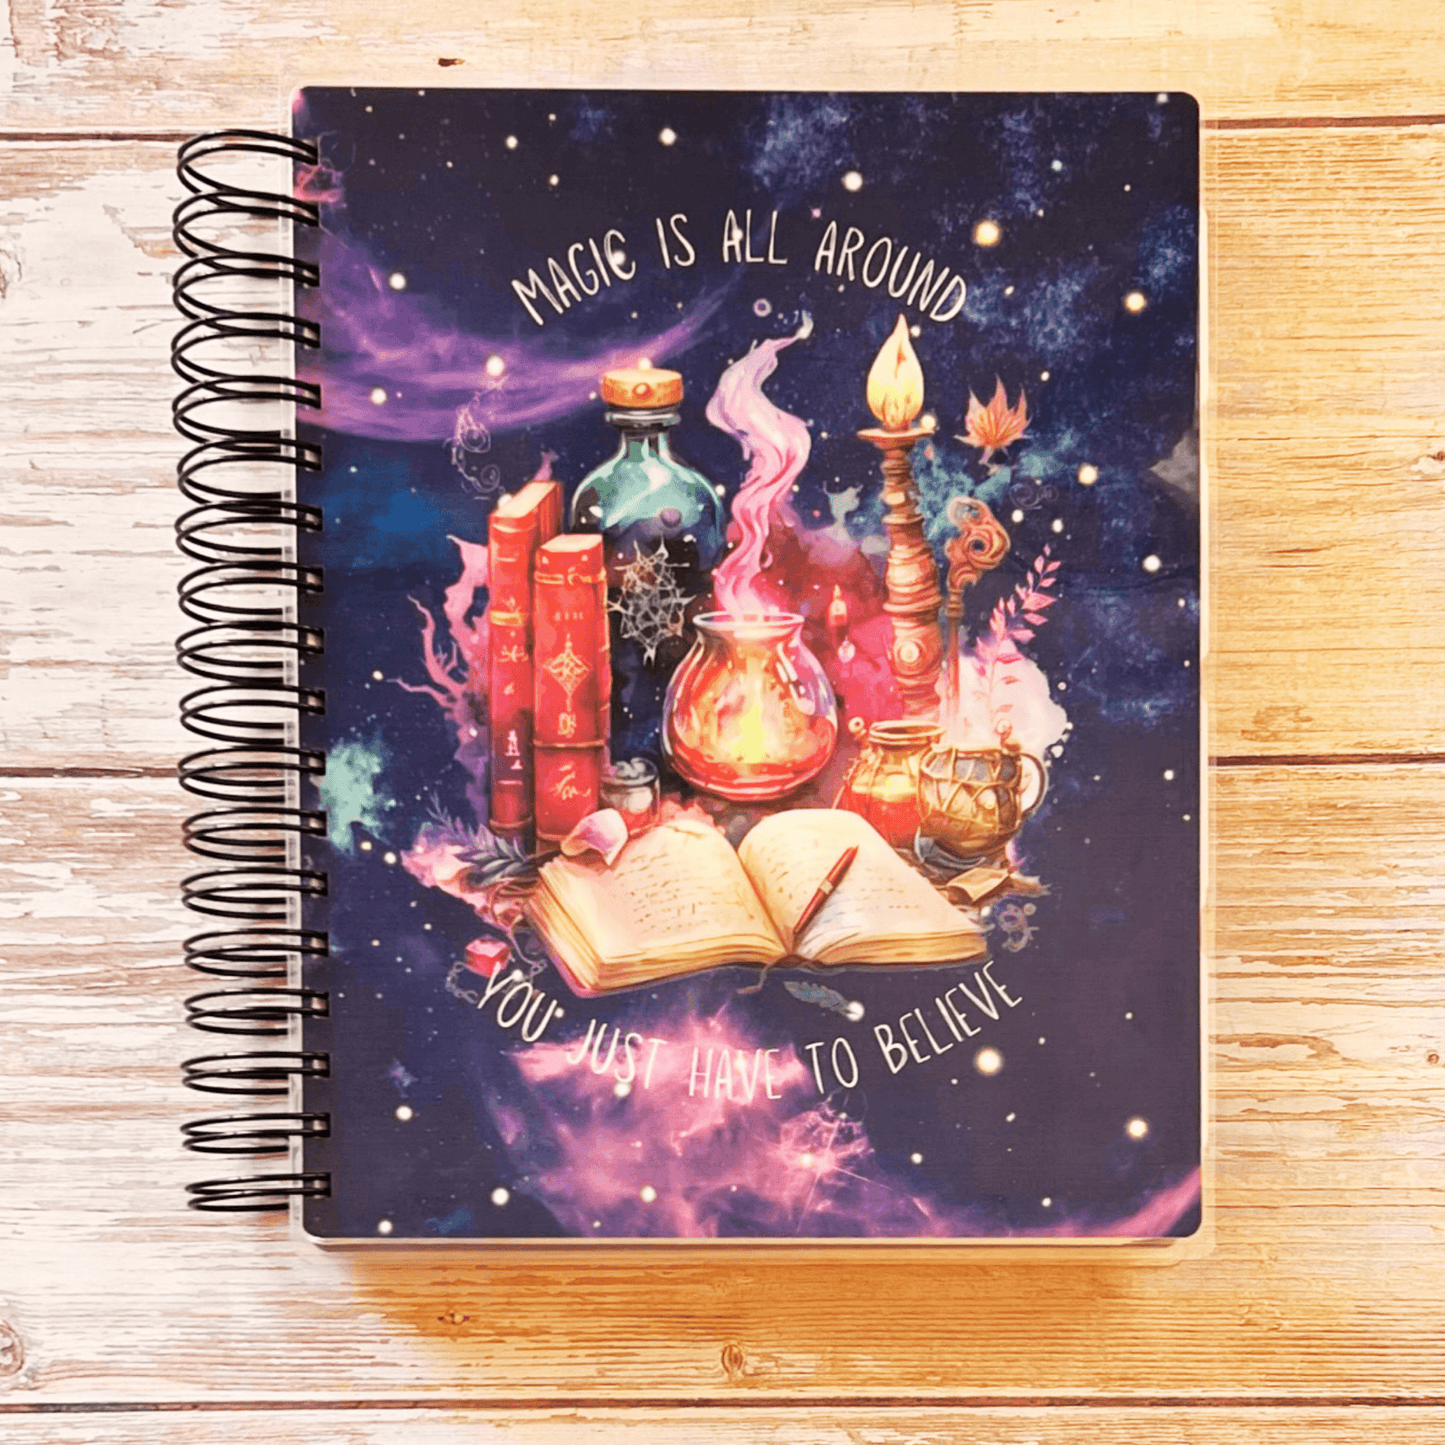 2023-2024 Personalized Monthly Planner - Mystical Spells Monthly Planners Artful Planner Co. July-2023 20 Meal Planner Pages added to back +$3.00 